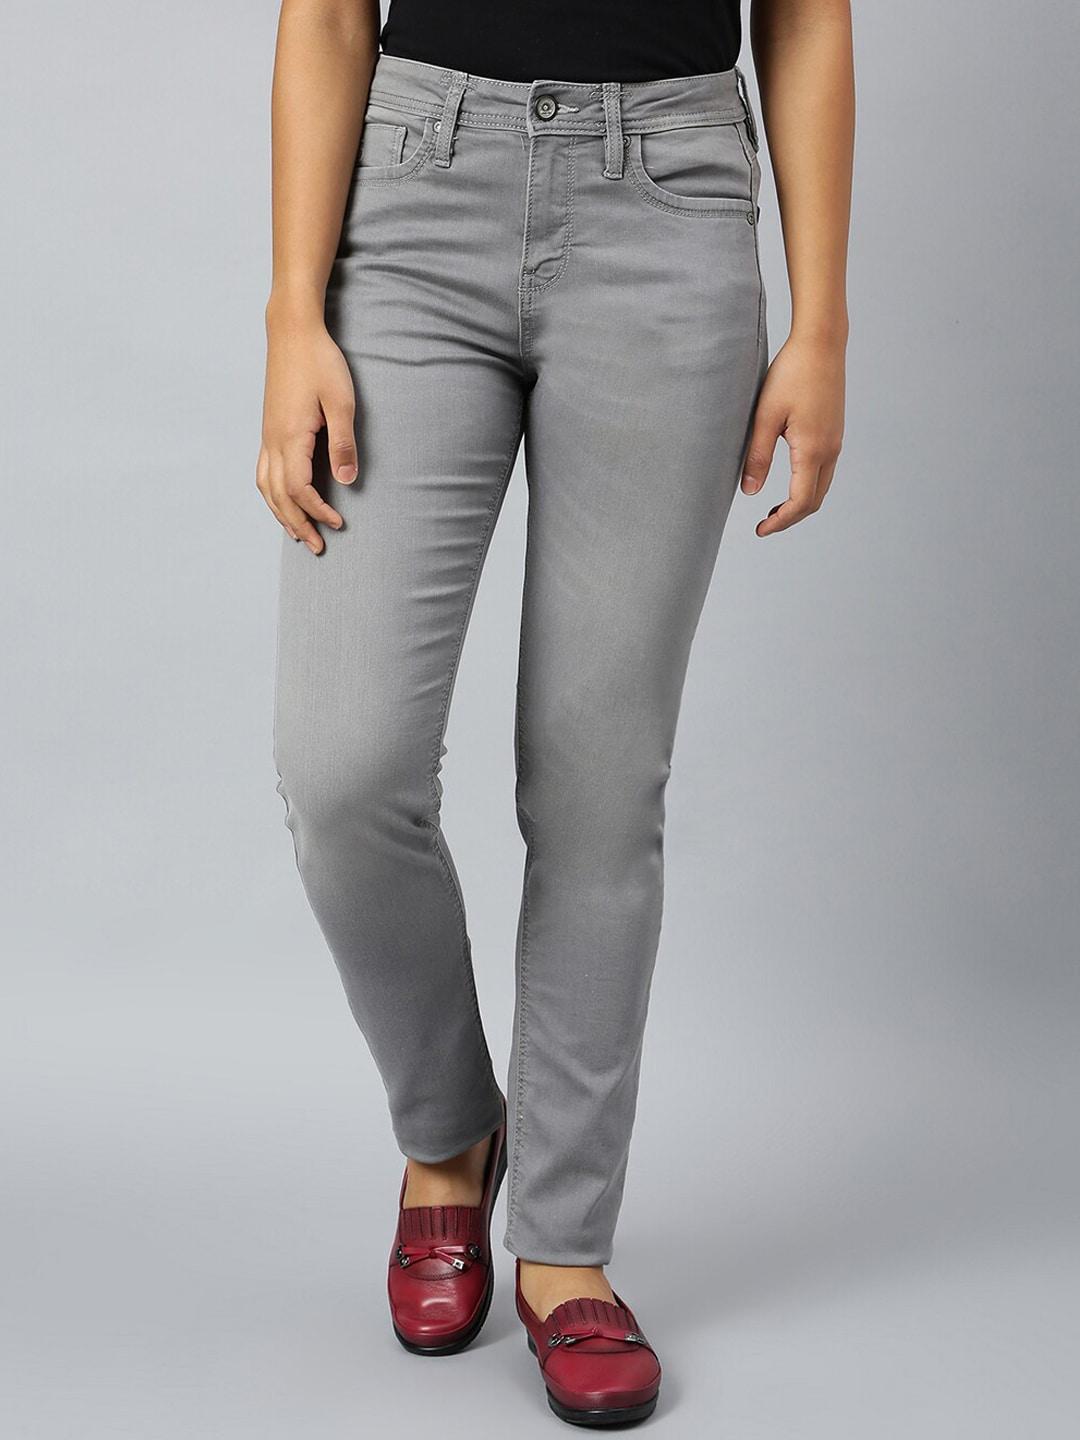 woodland-women-grey-light-fade-stretchable-jeans